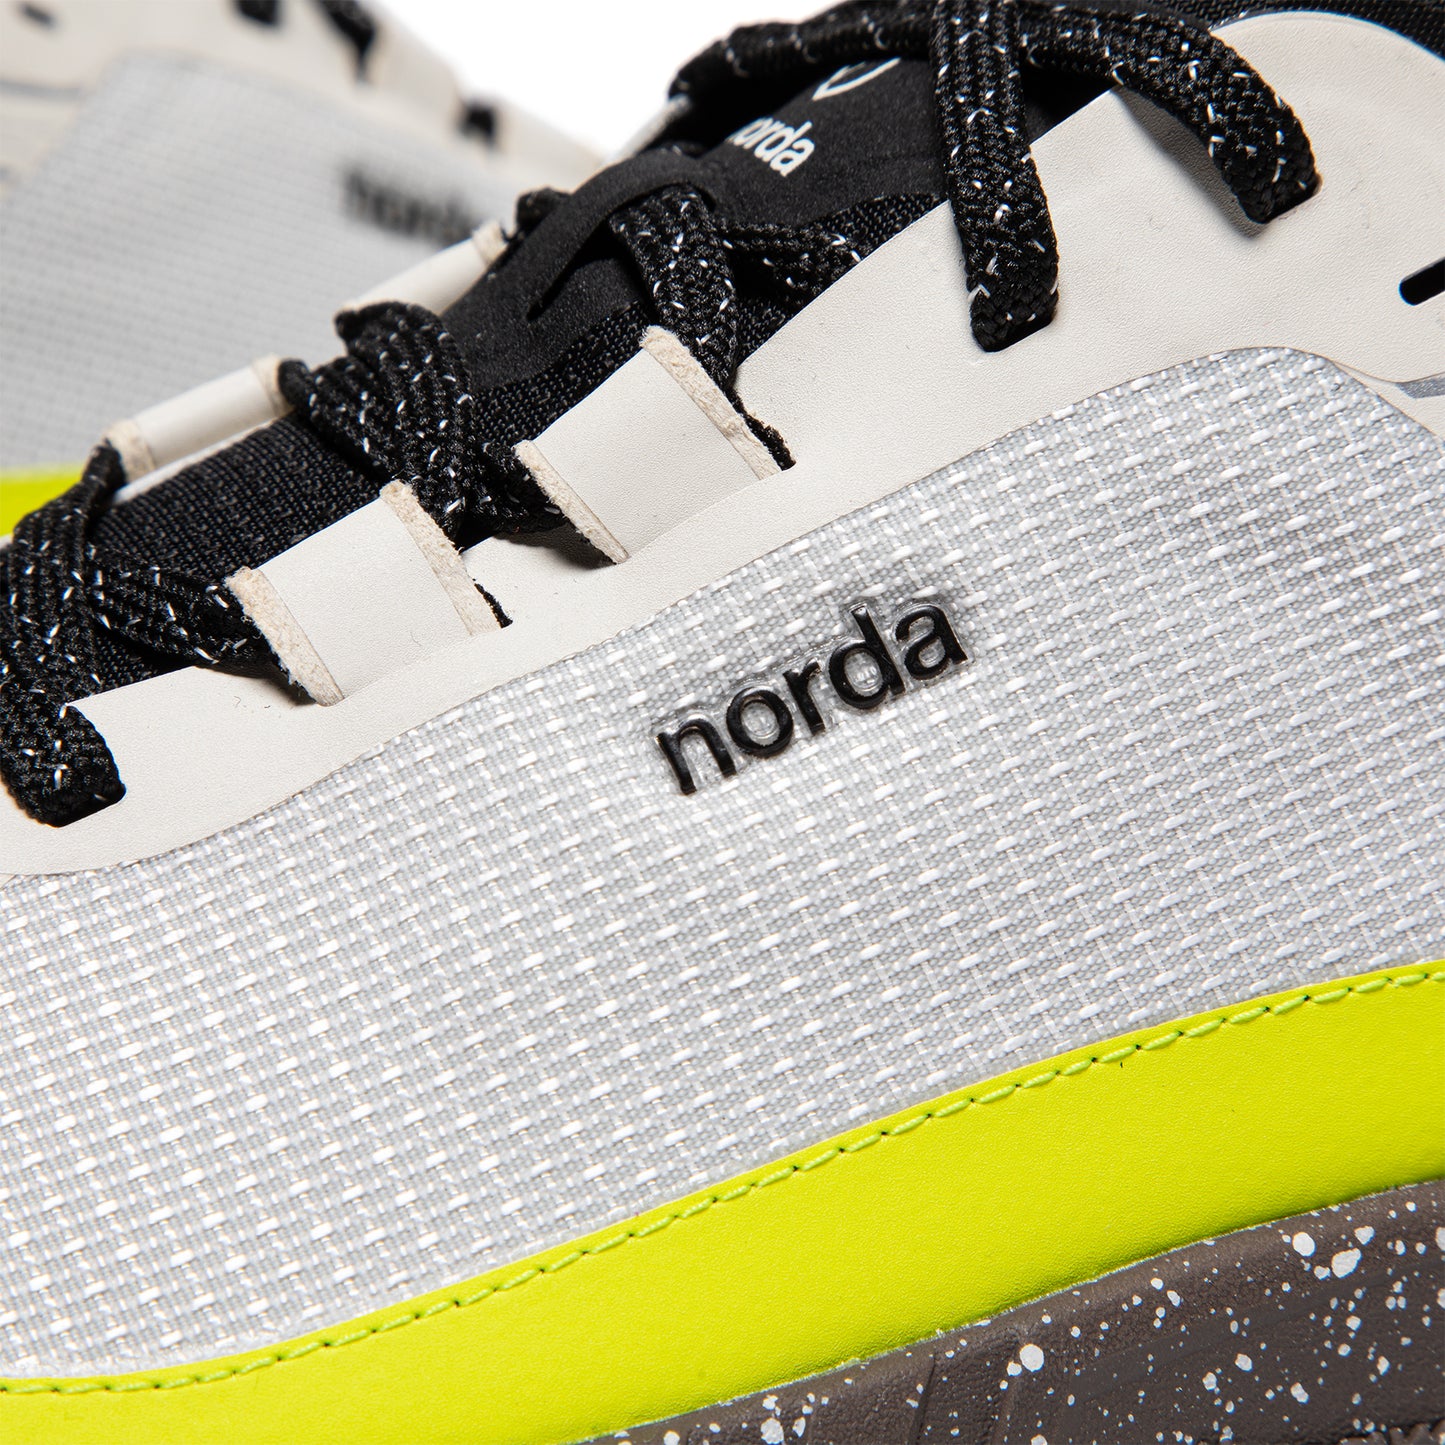 norda 001 Limited Edition (Icicle)